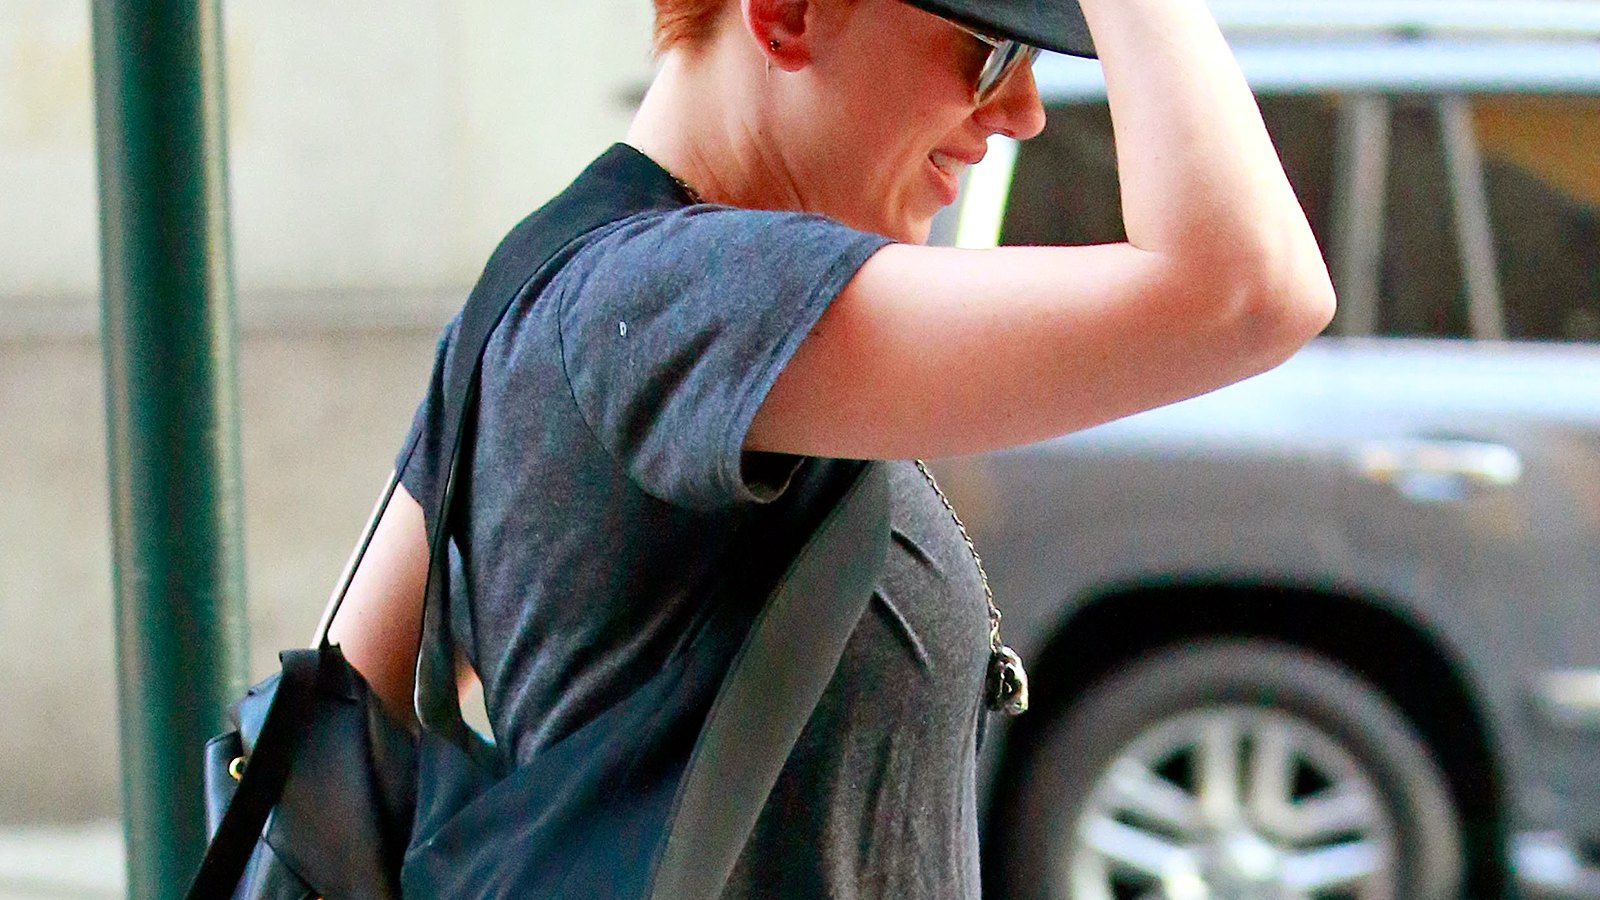 Scarlett Johansson debuts new red hair in NYC on July 22, 2015.